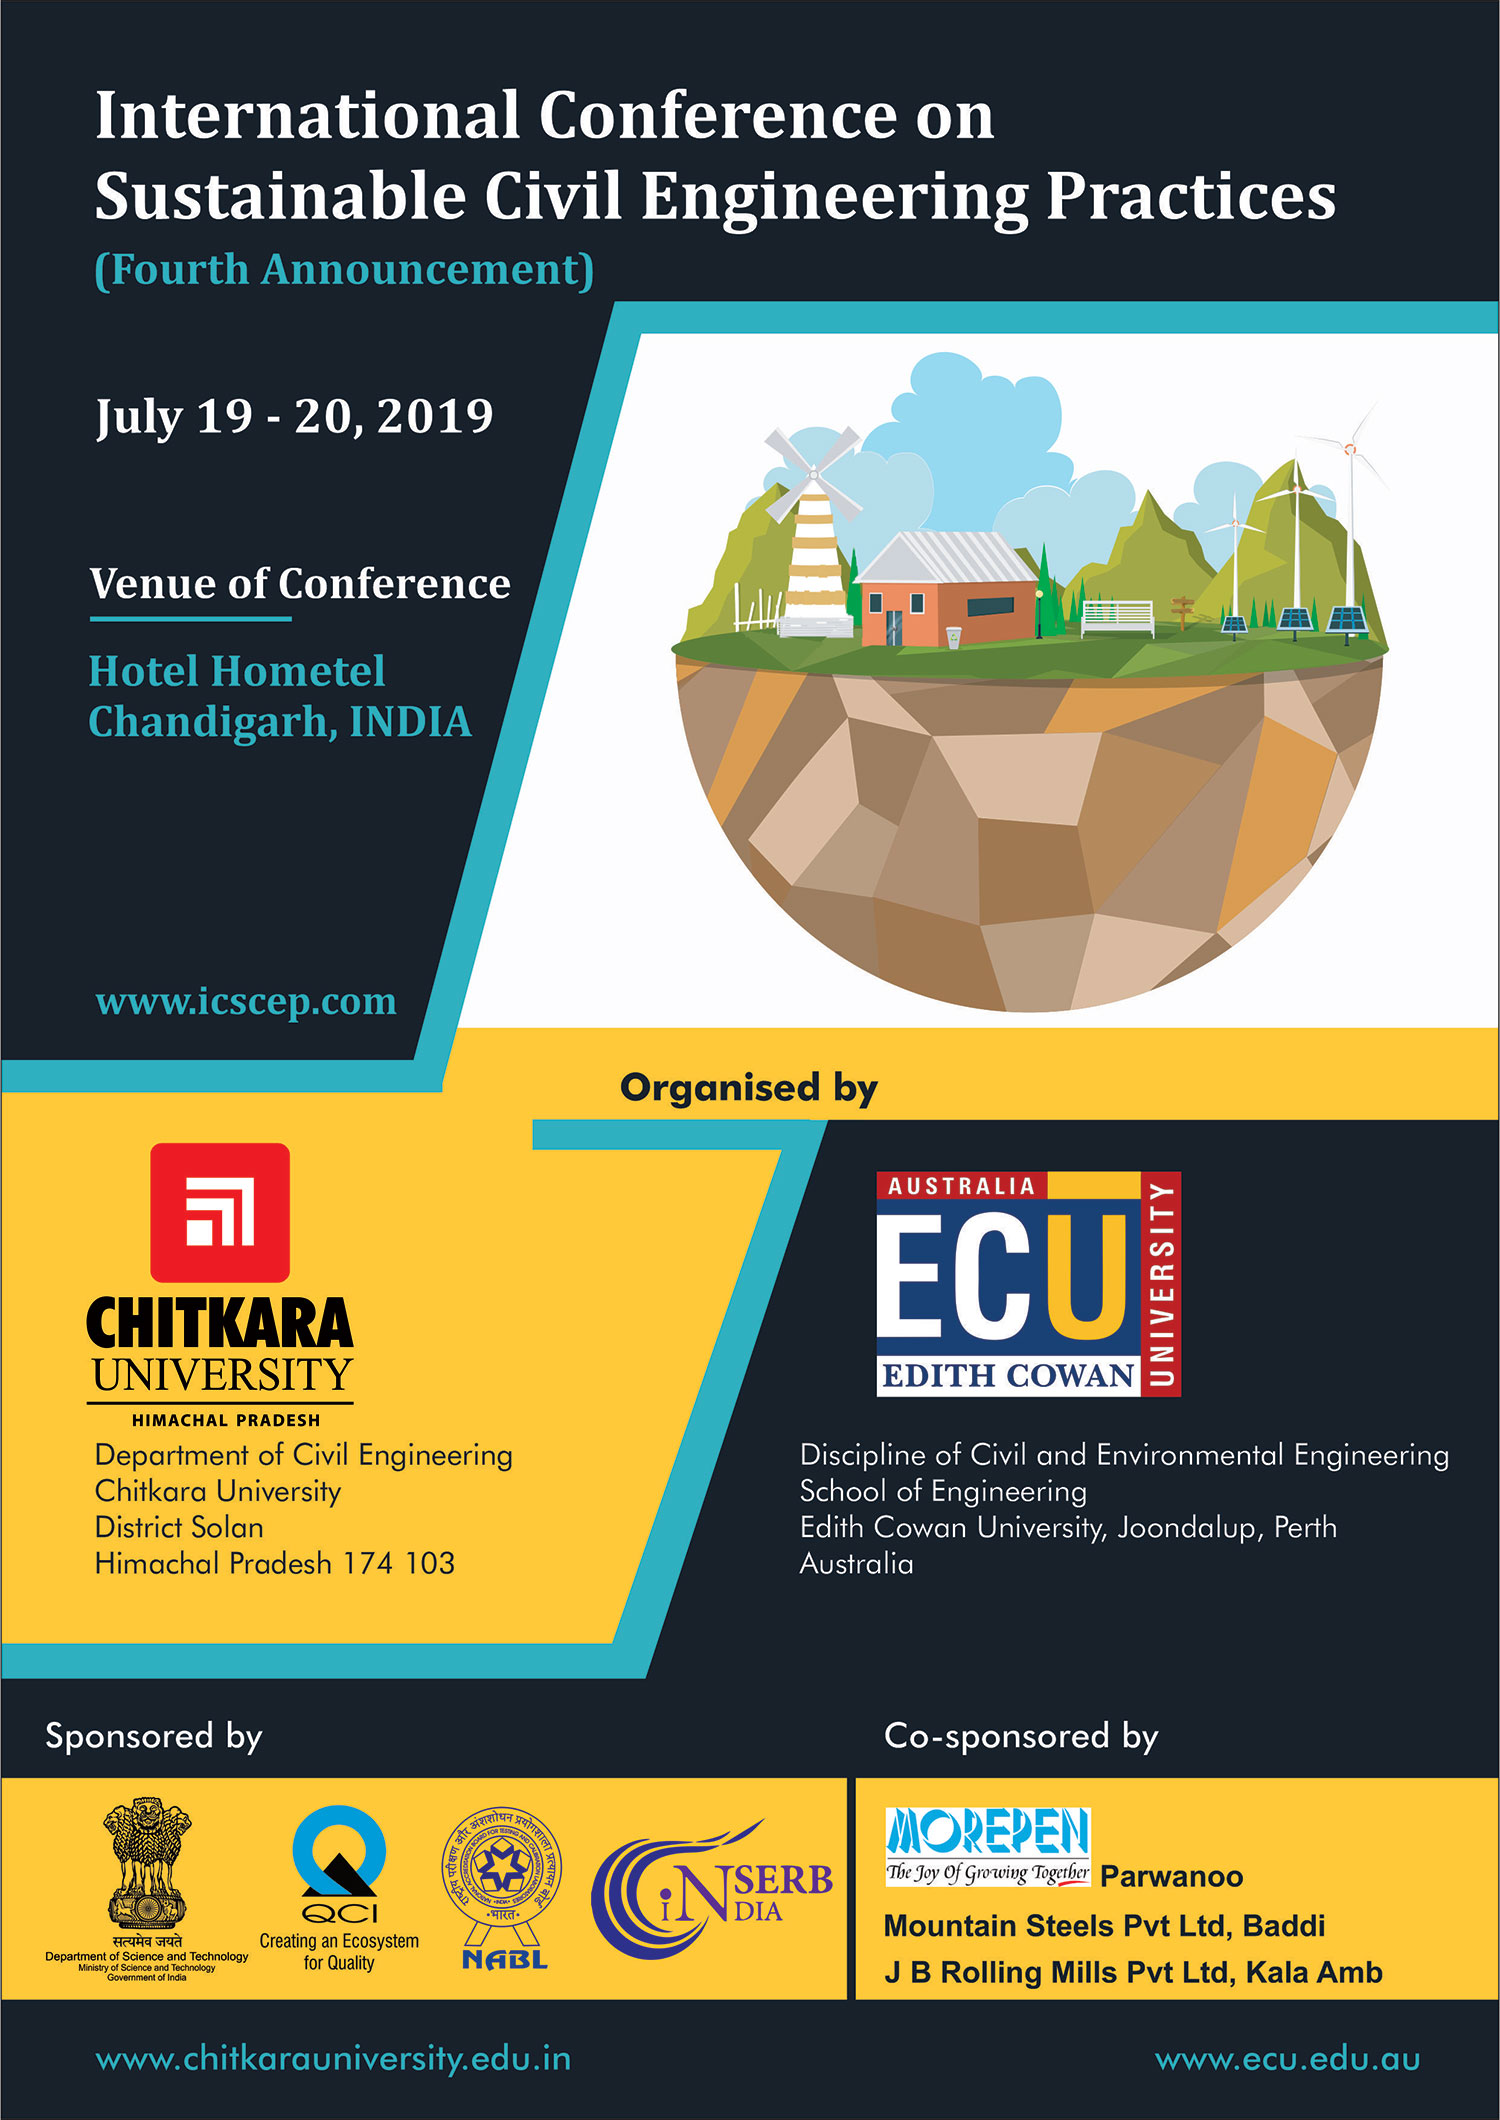 International Conference on Sustainable Civil Engineering Practices (ICSCEP) at Chitkara University